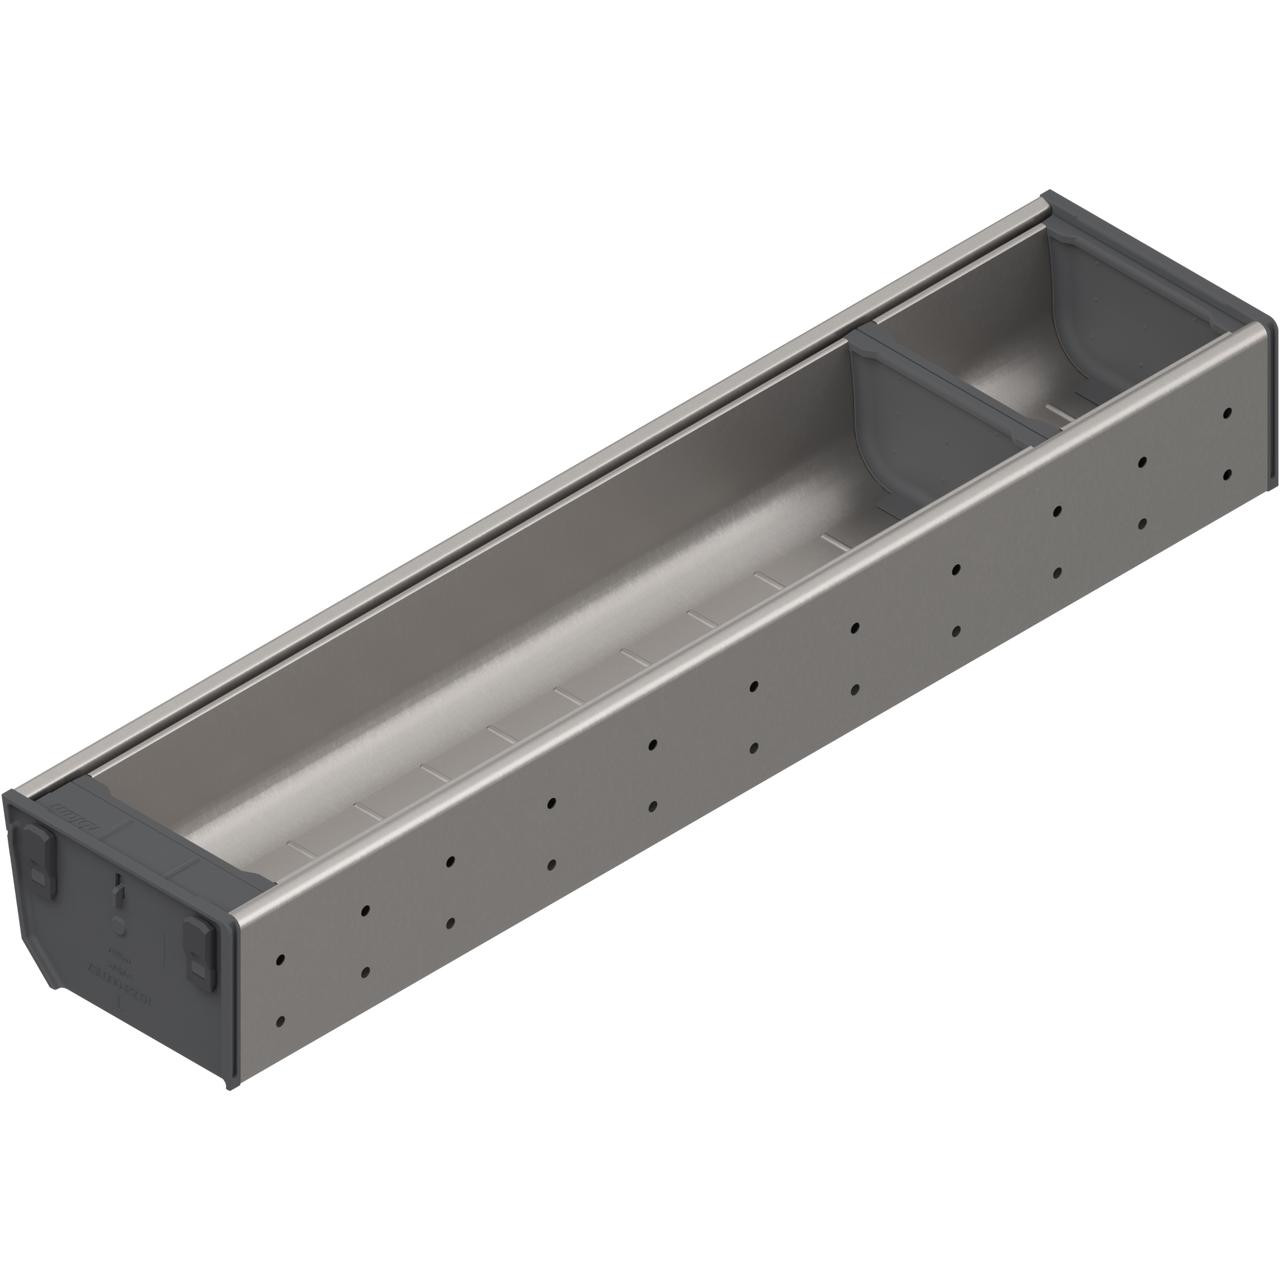  Blum ZSI.500BI1N ORGA-LINE odds and ends set, for TANDEMBOX drawer, NL=500 mm, width=103 mm 